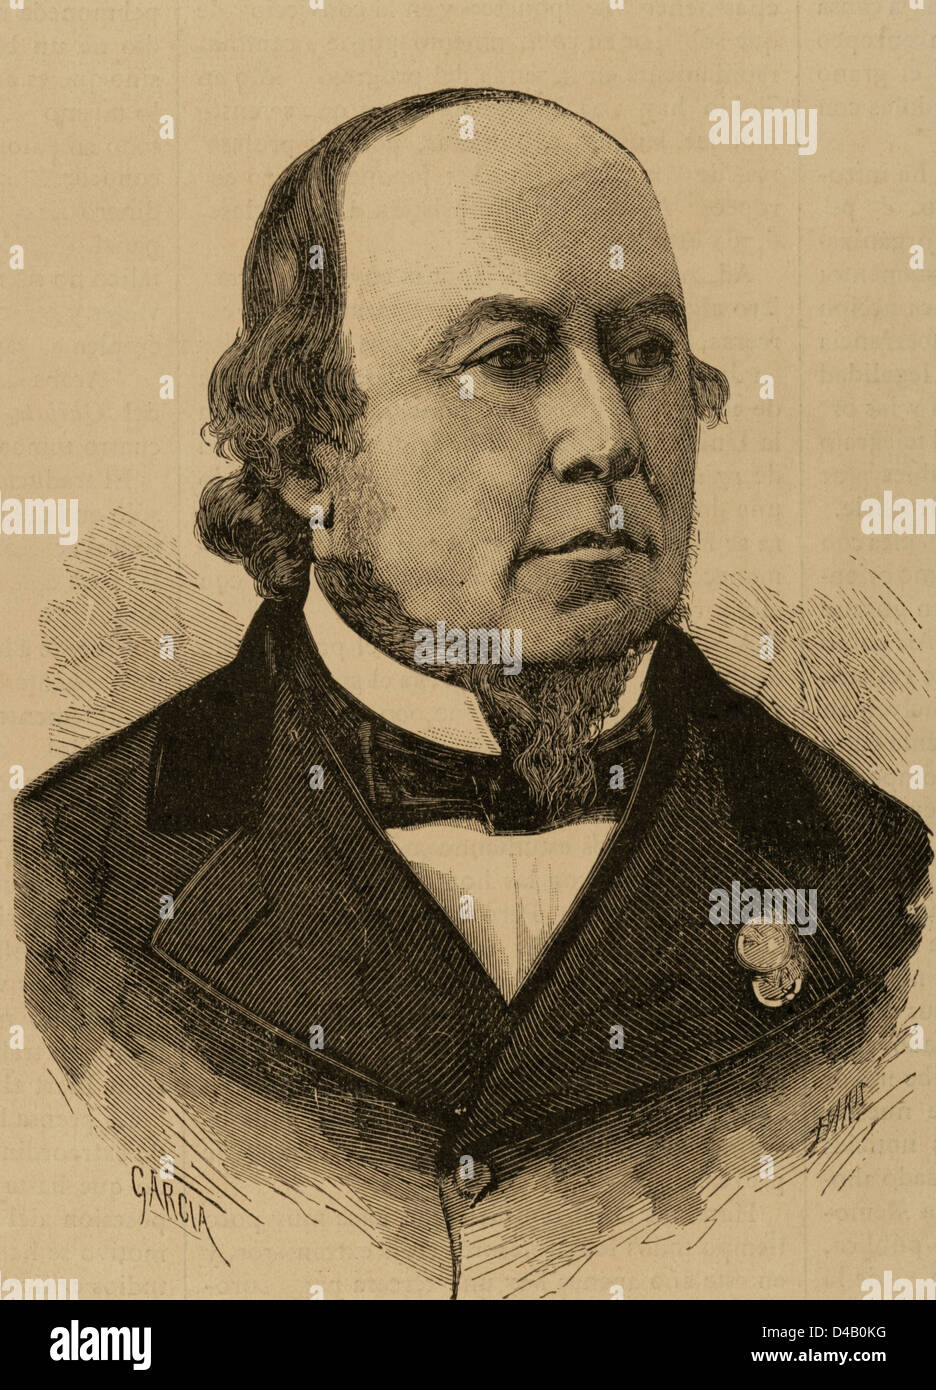 Narciso Carbo de Aloy (1826-1890). Spanish physician and researcher. Engraving. Stock Photo